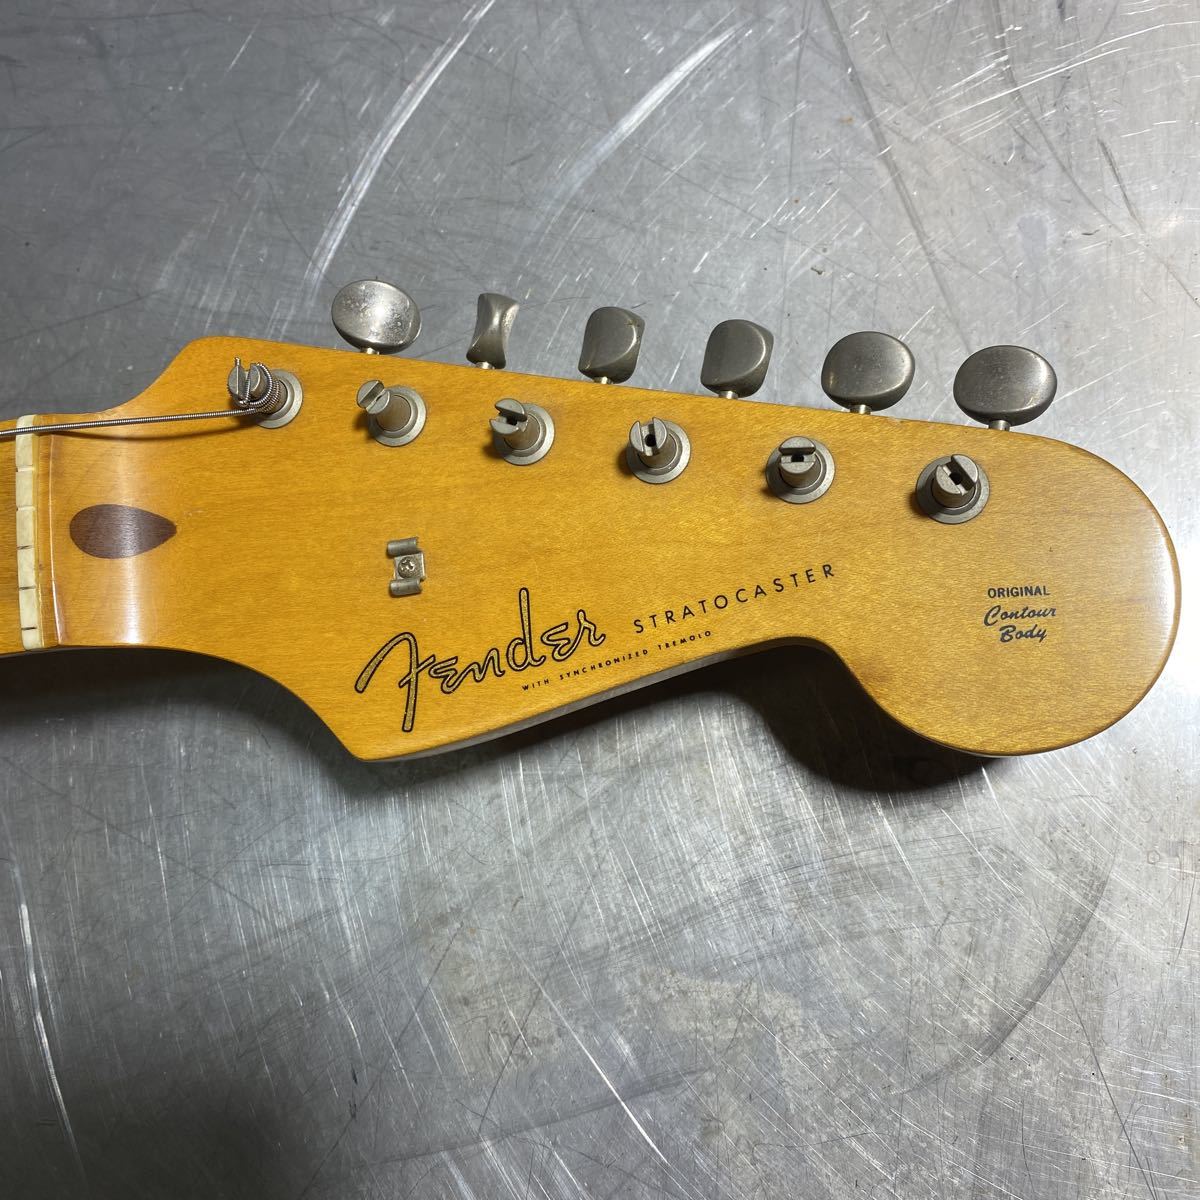 Fender エレキギター Stratocaster 音出し確認済 made in Japan